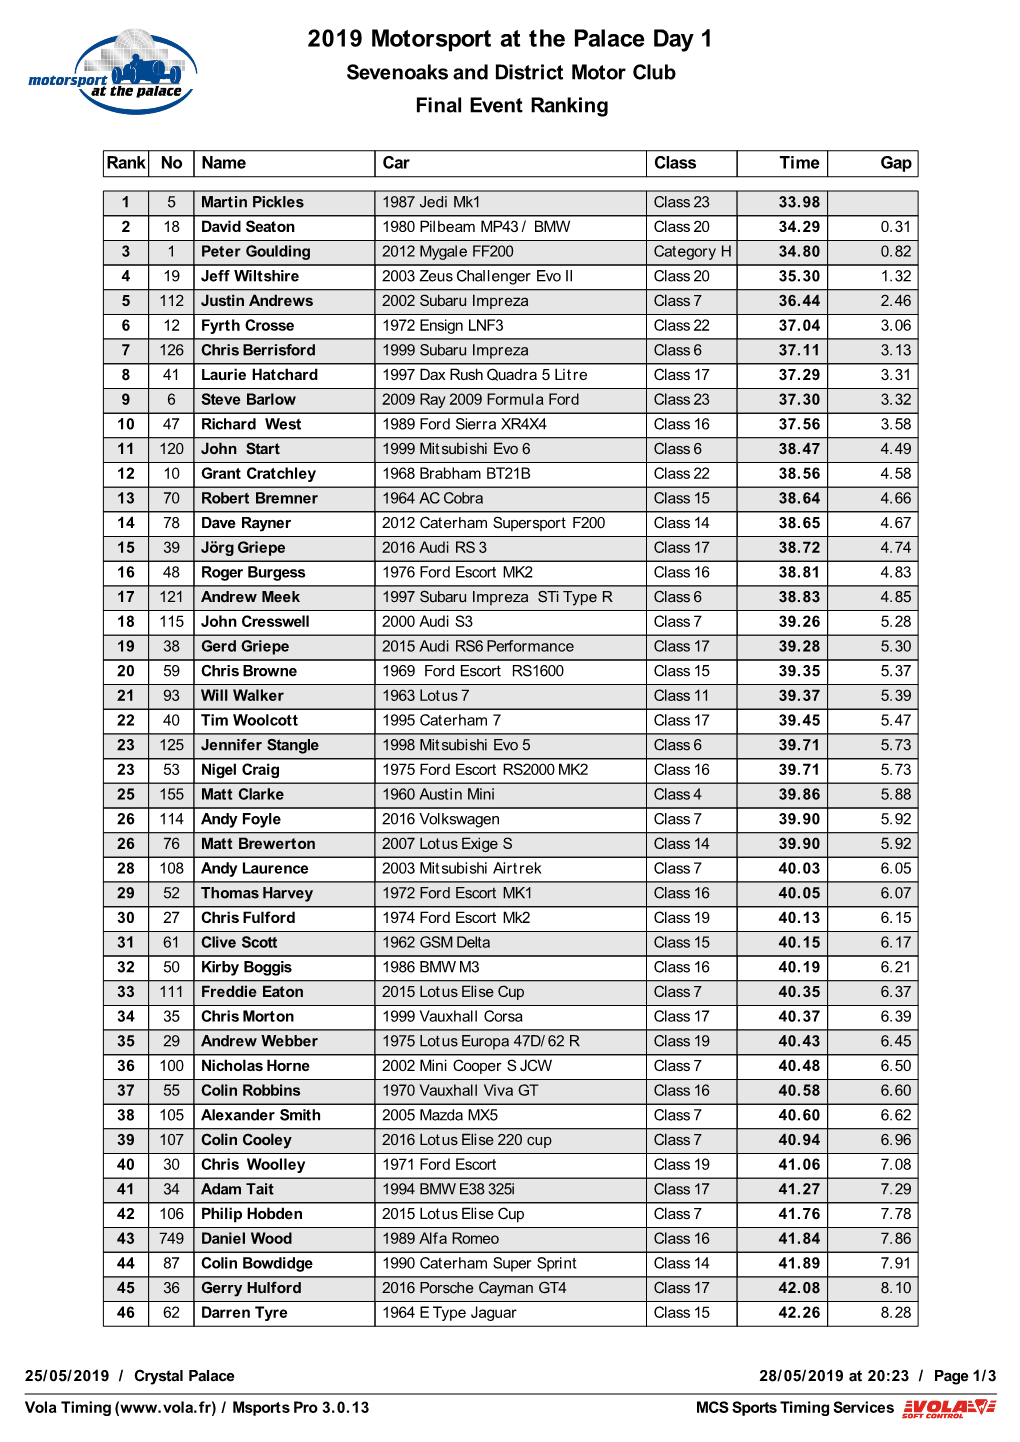 2019 Motorsport at the Palace Day 1 Sevenoaks and District Motor Club Final Event Ranking